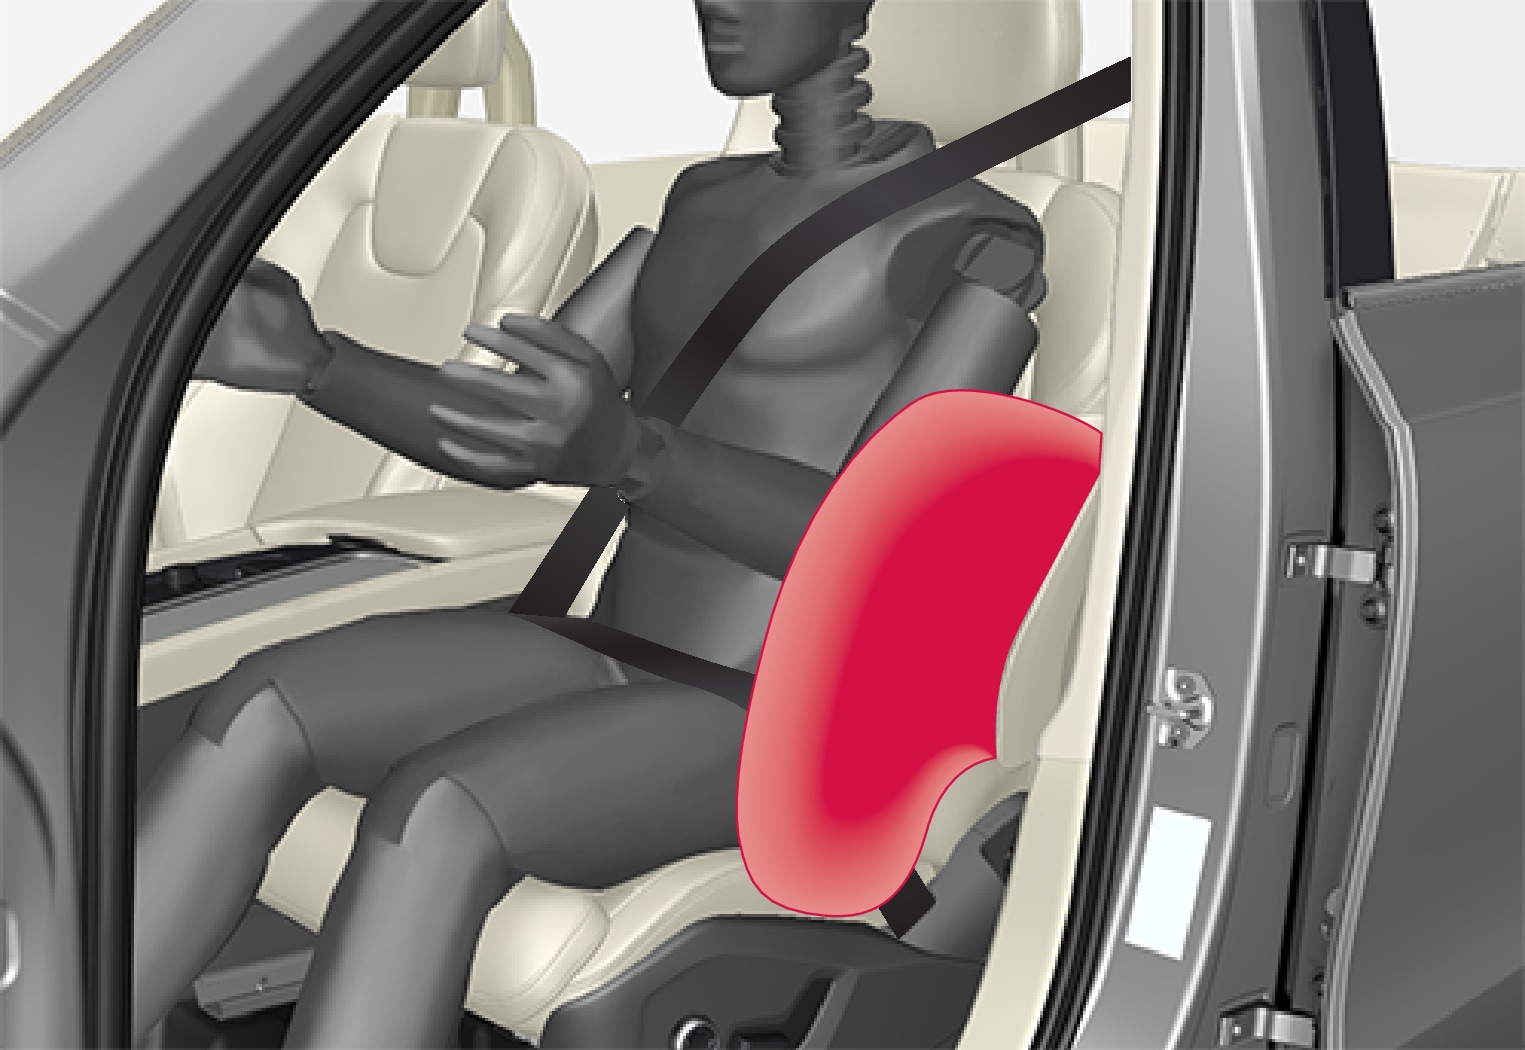 P5-1507-Safety-Side Impact Protection System, side airbag